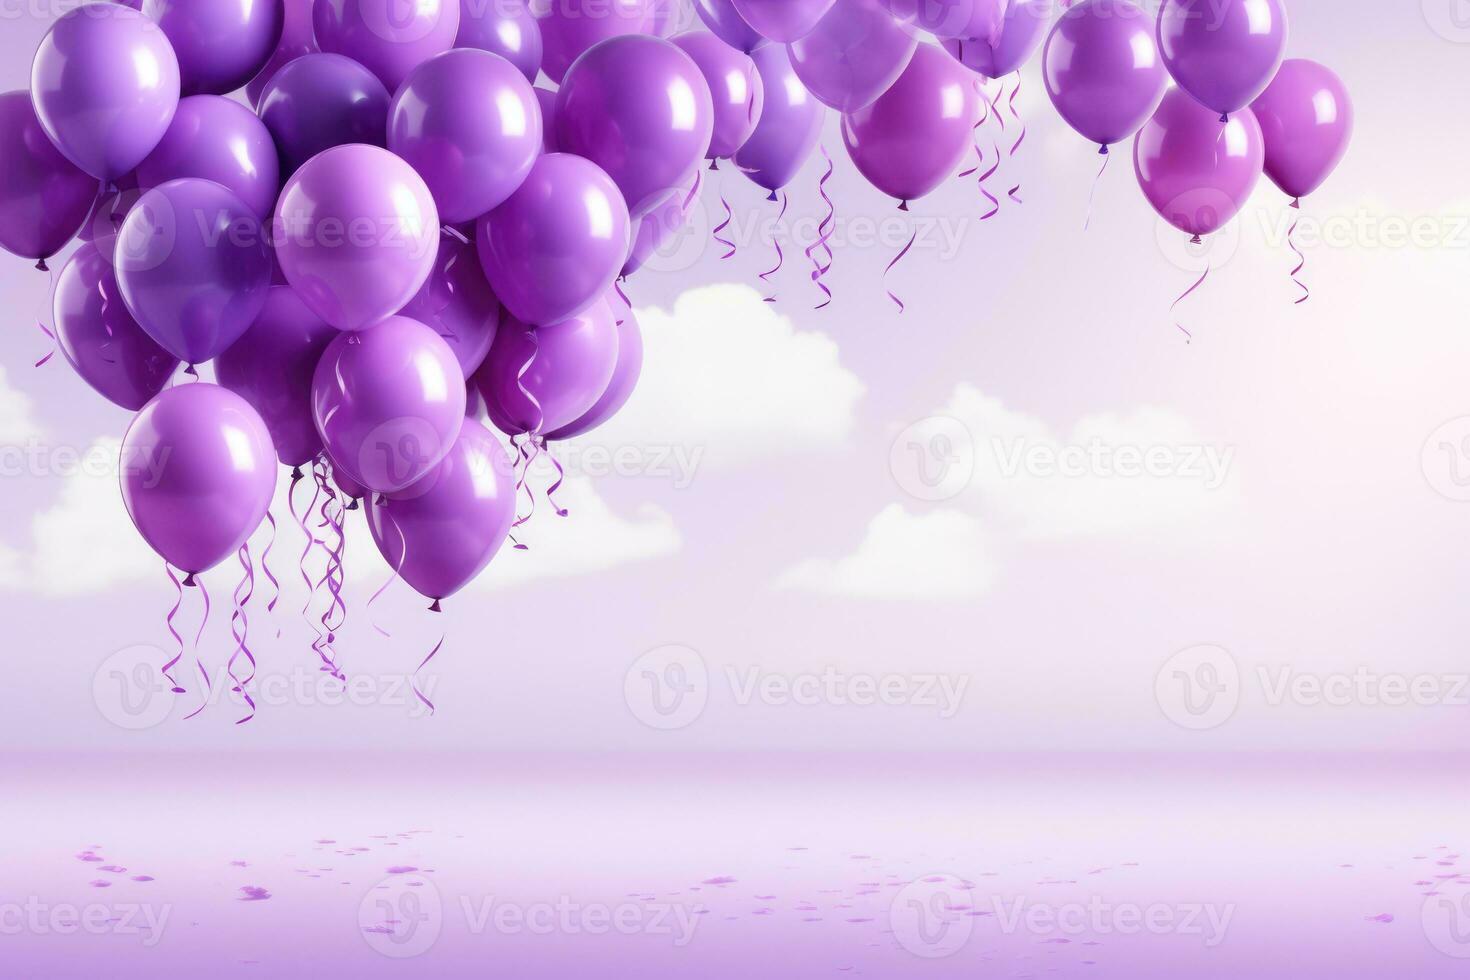 Purple balloons release at epilepsy awareness event background with empty space for text photo